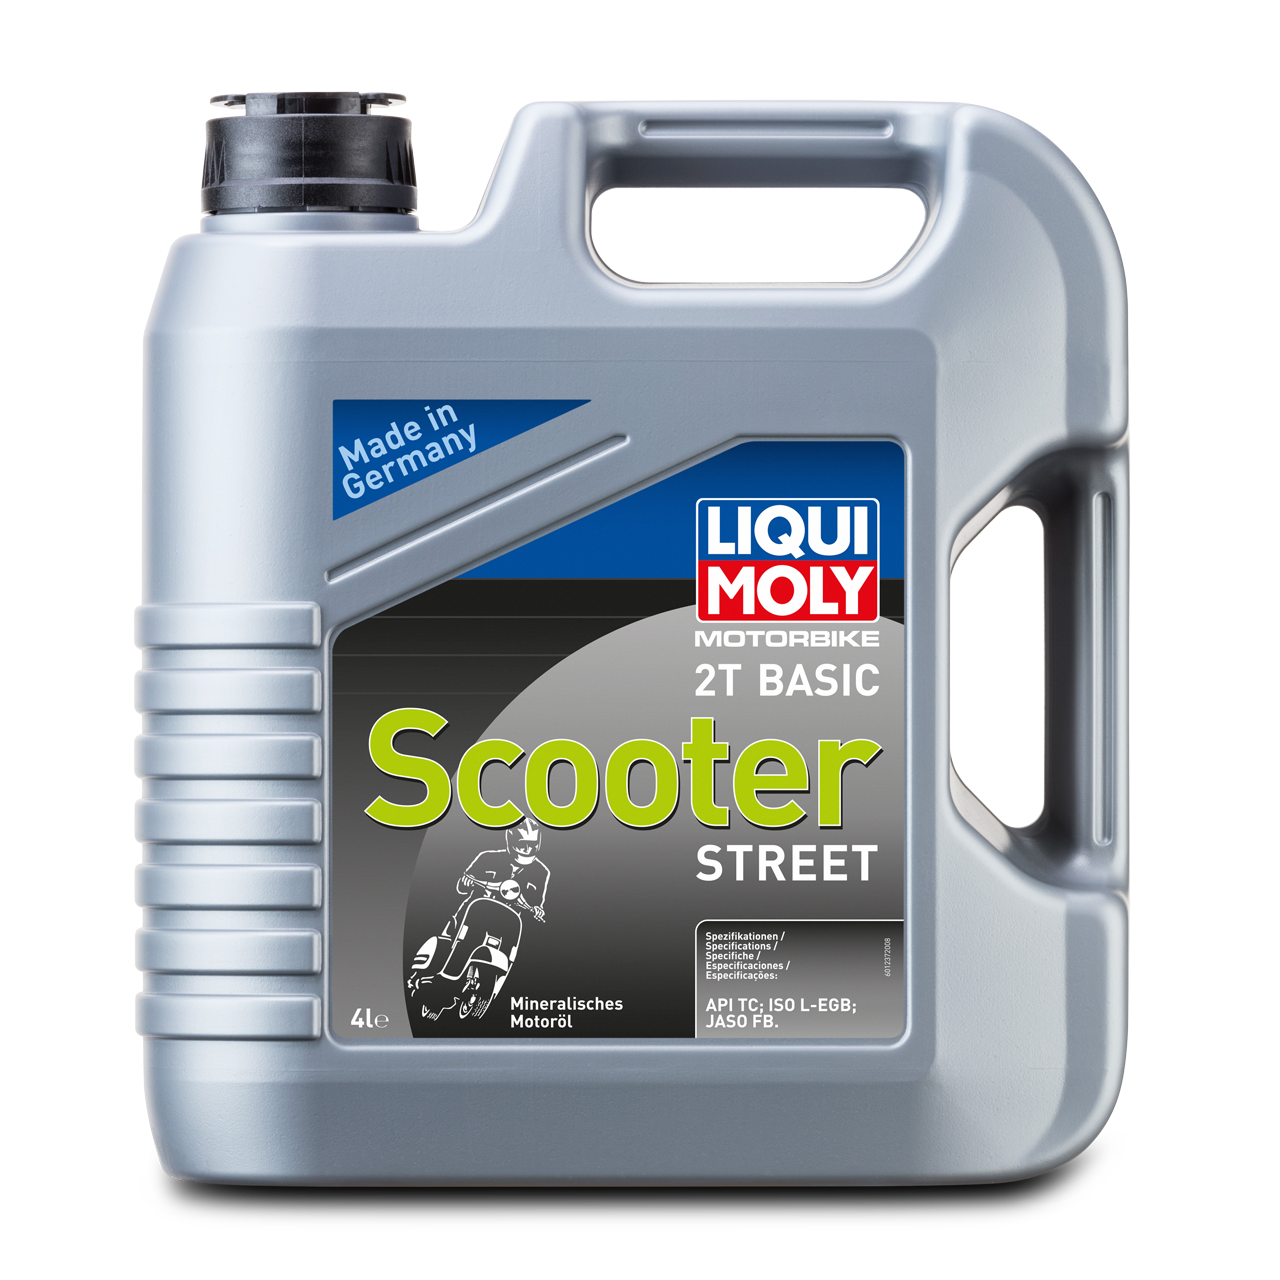 LIQUI MOLY Basic Scooter Two-Stroke Oil - Lowest Price Guarantee